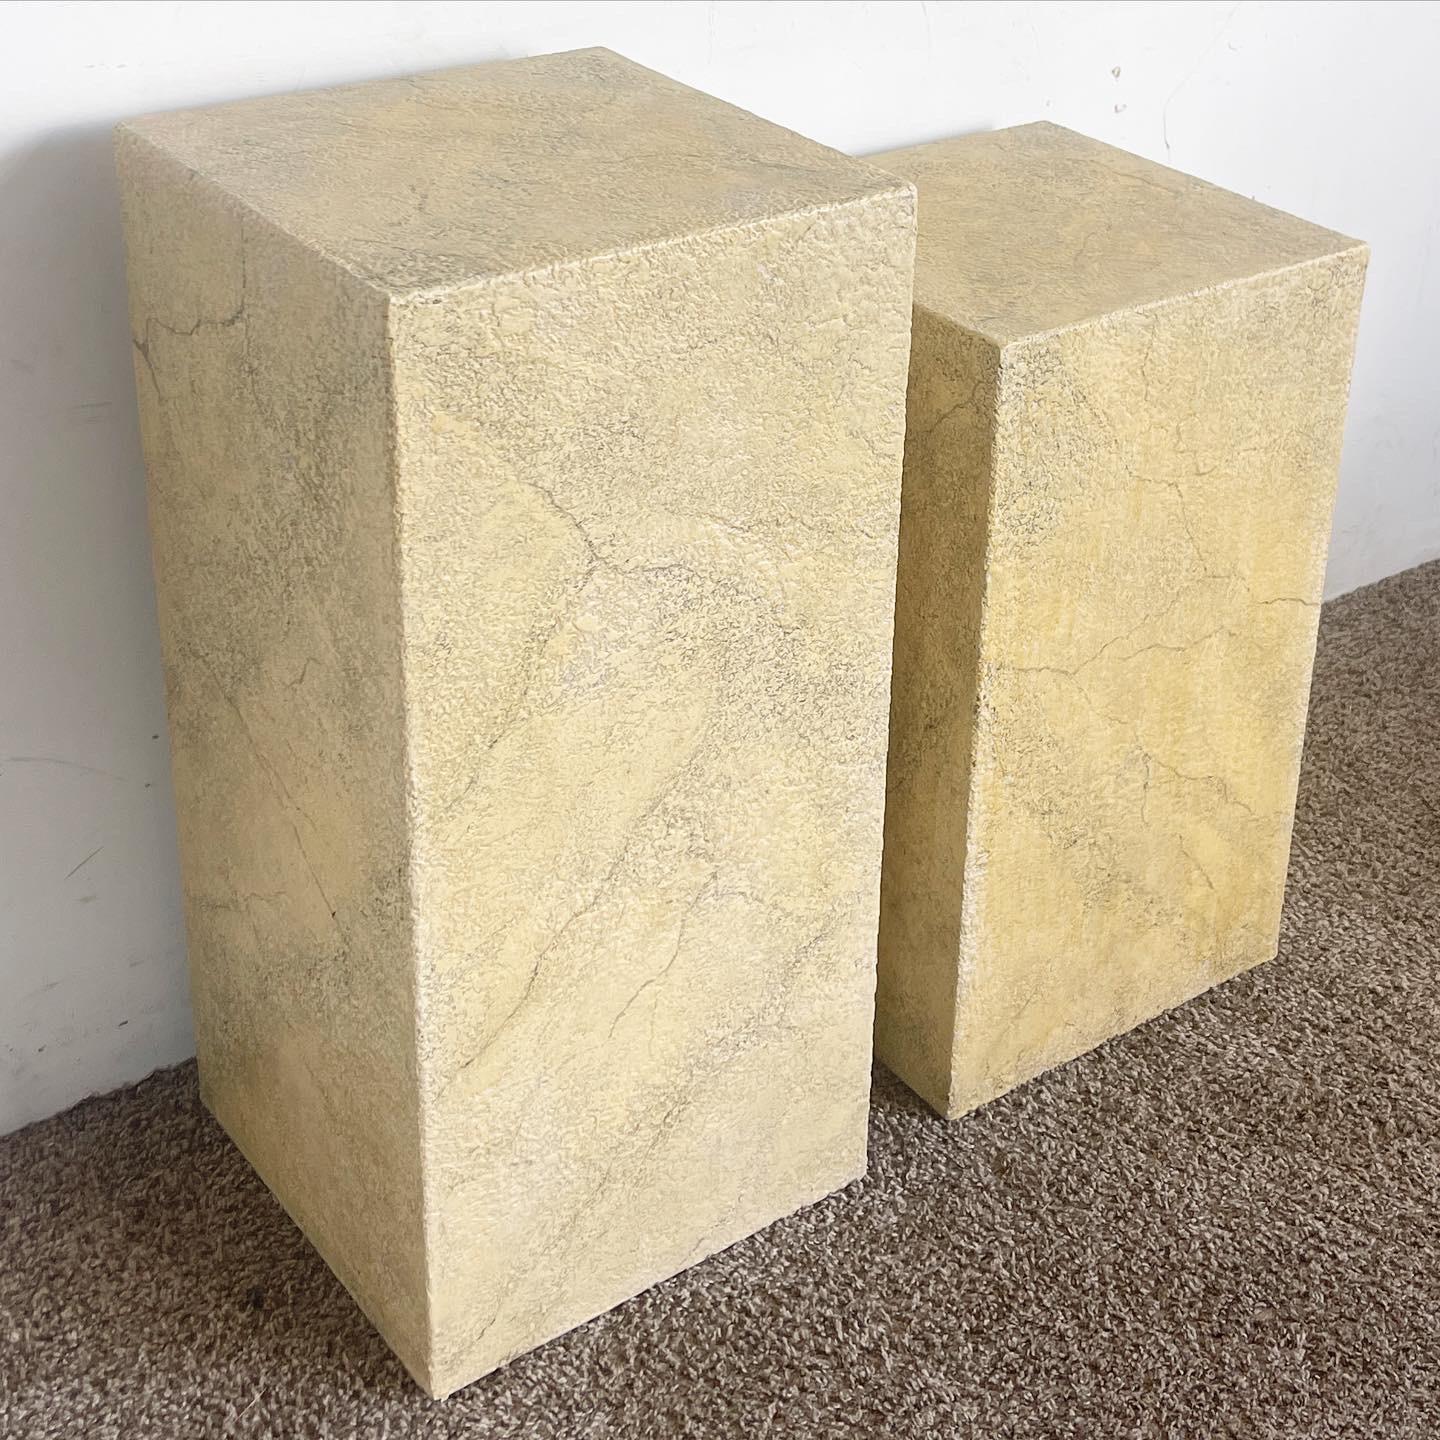 Enhance your interior with a pair of Postmodern Faux Beige Stone Pedestals, crafted for versatility and sophistication, perfect for showcasing art pieces.

Crafted to resemble authentic stone with a timeless beige hue.
Perfect for showcasing